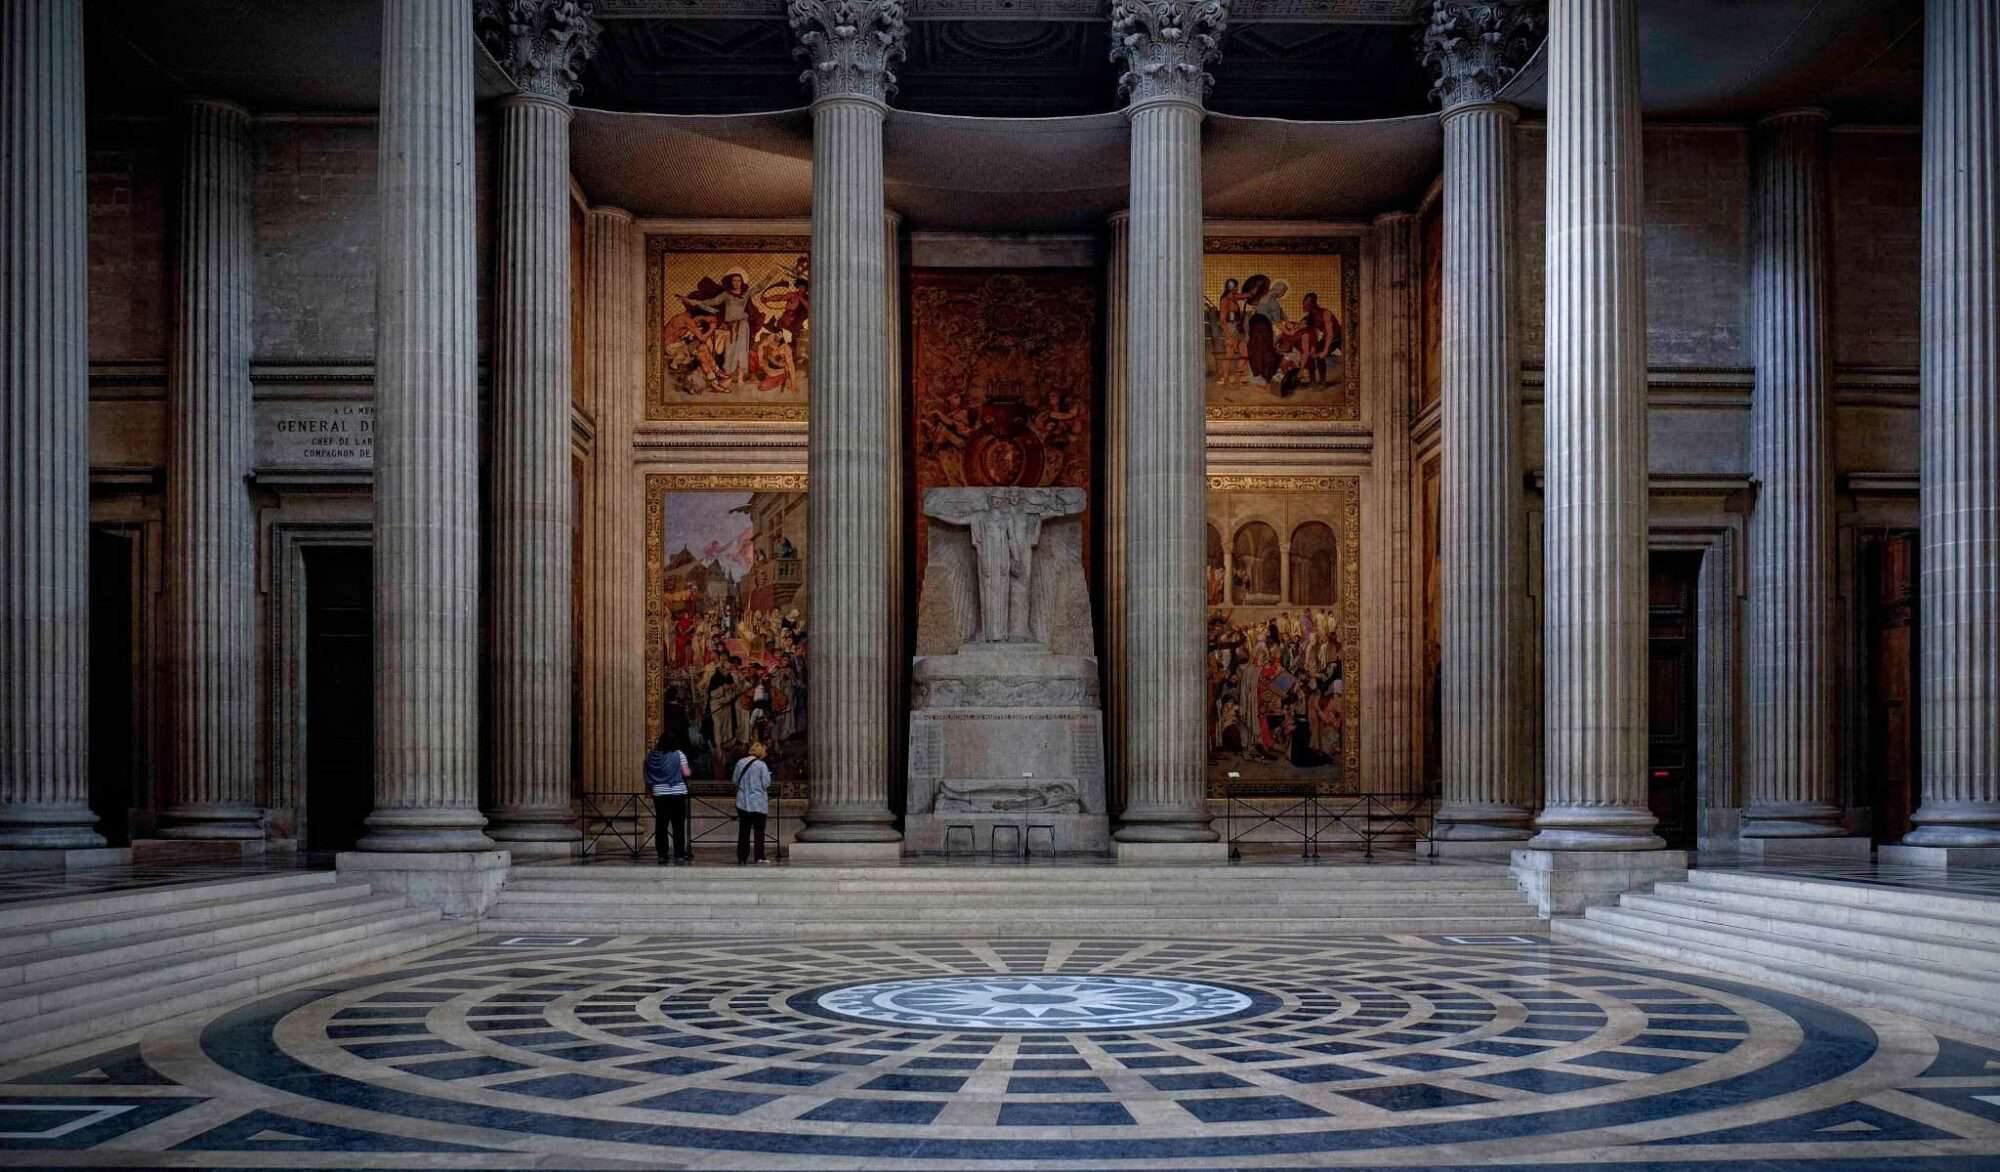 The interior of the Pantheon with a Roman columns, frescoes and blue and grey stone floor.